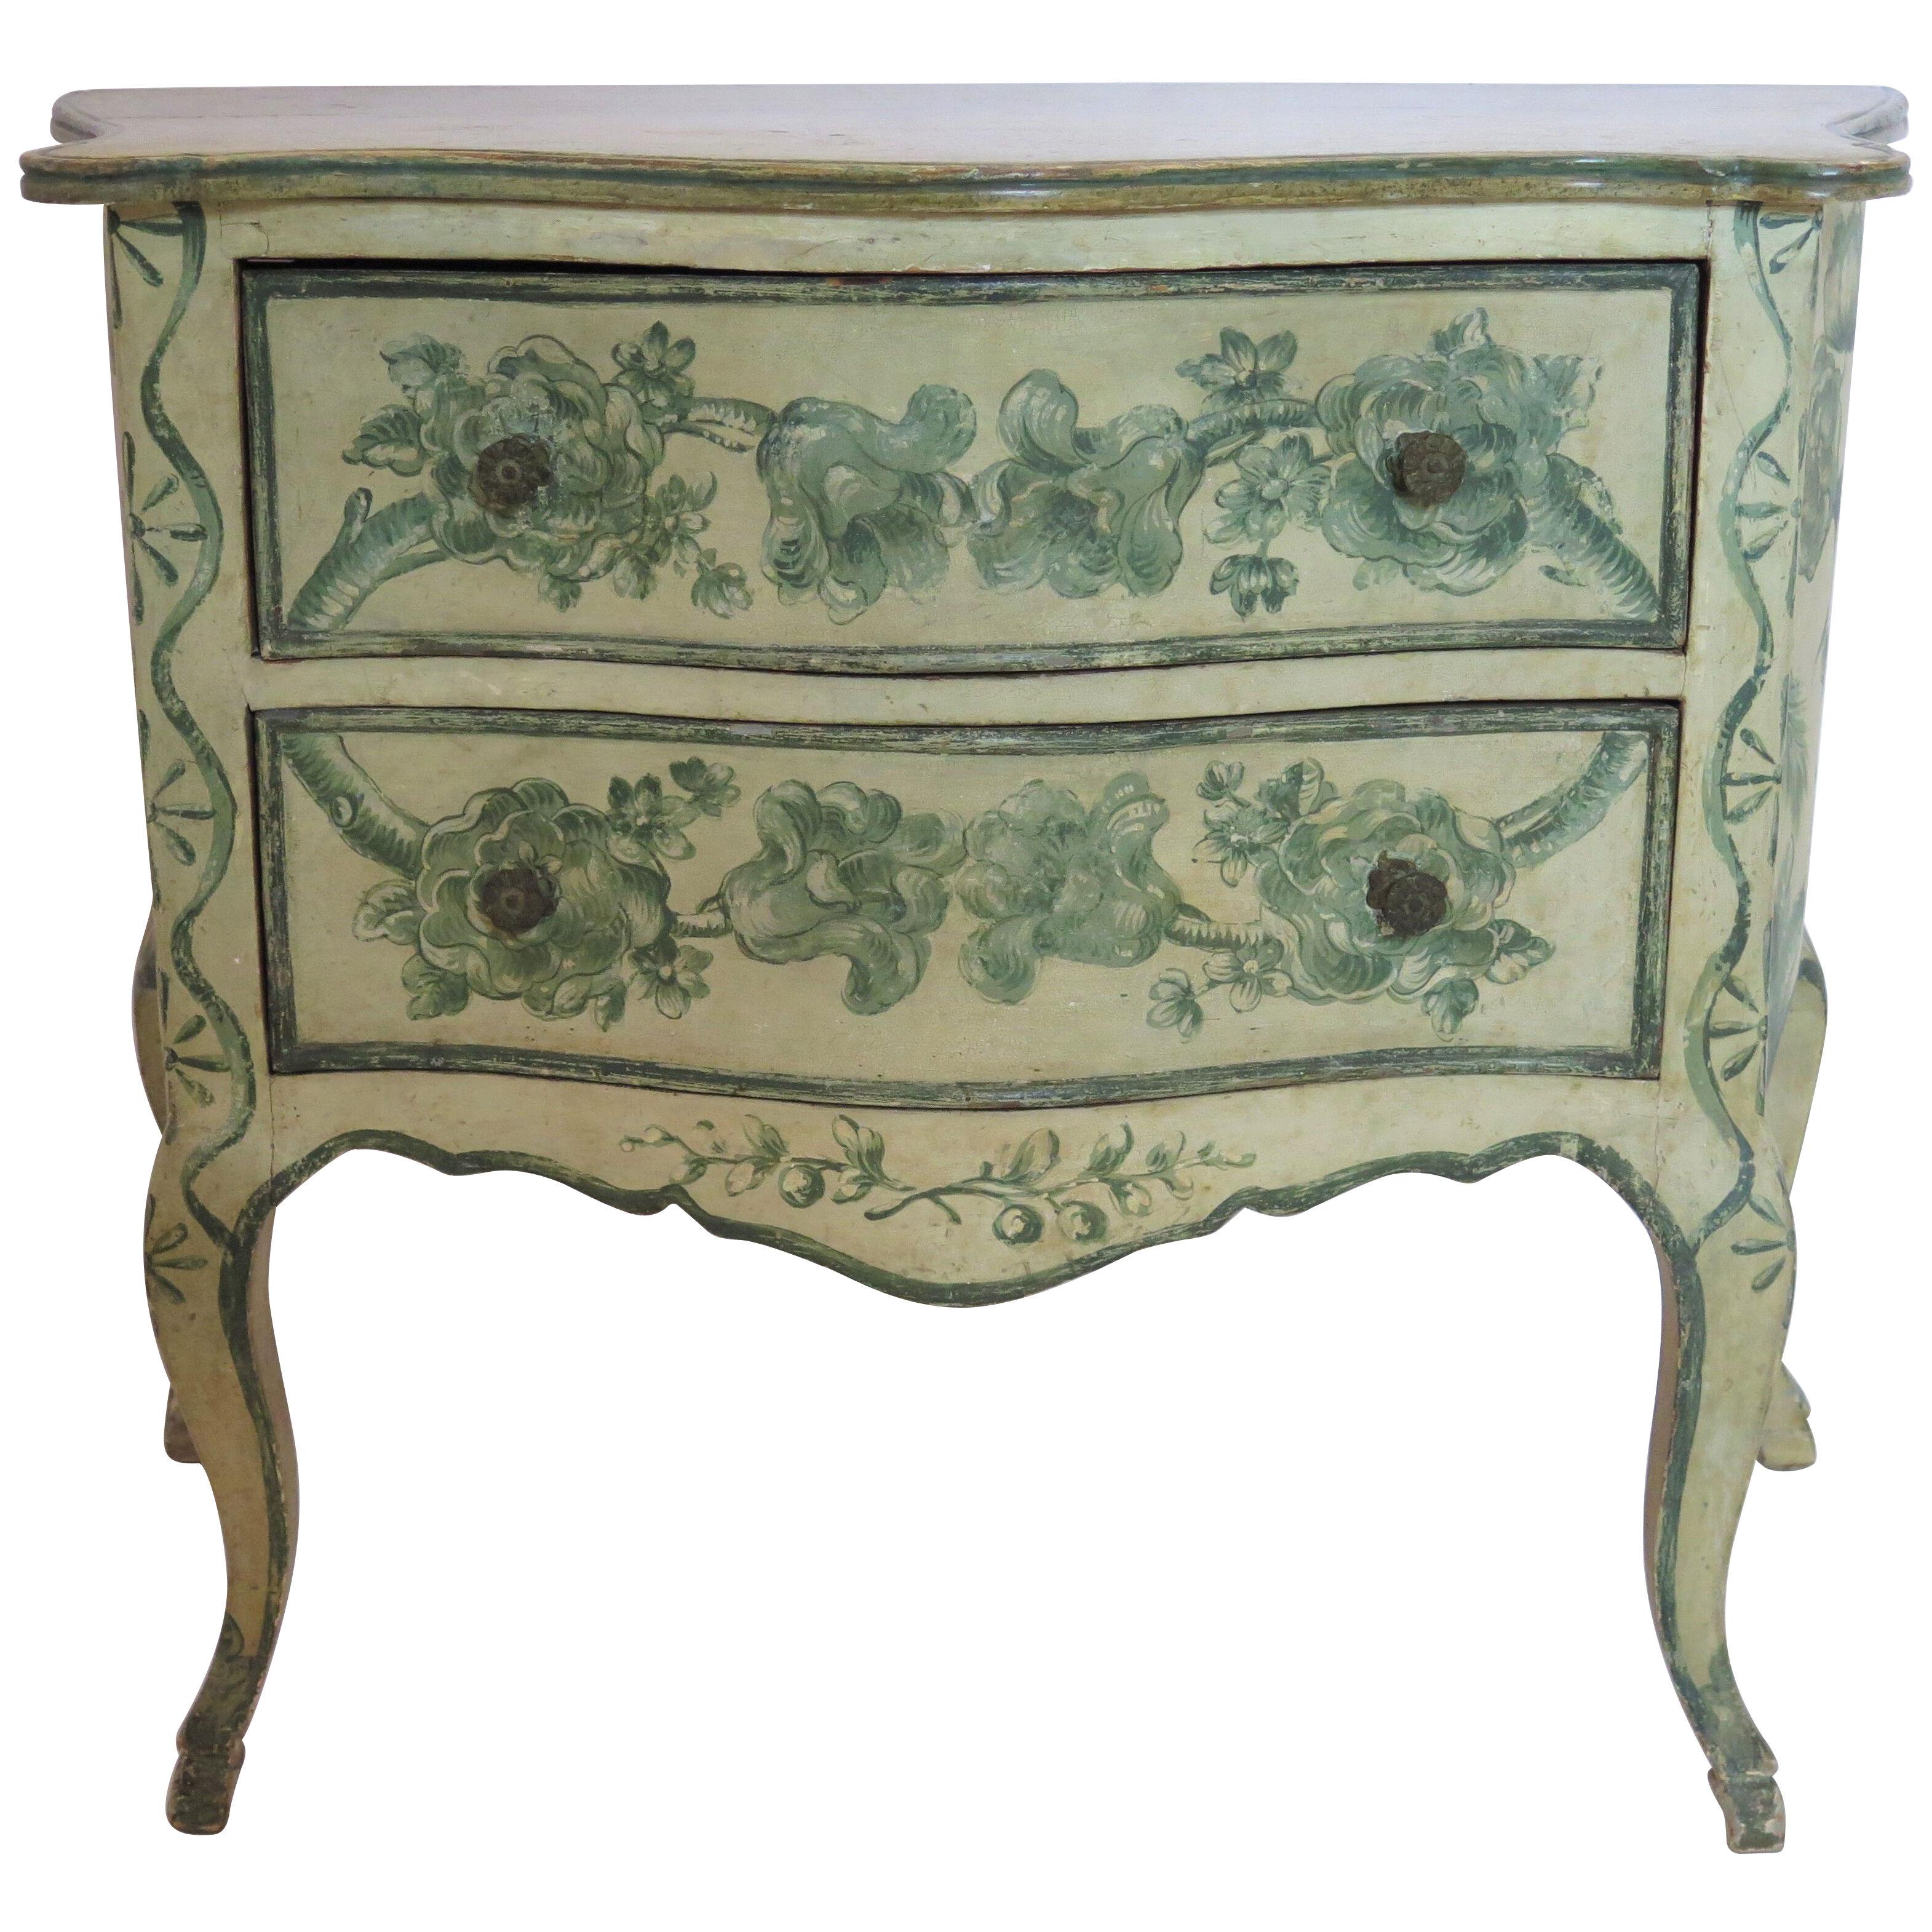 An Early Louis IV-Style Painted Venetian Commode